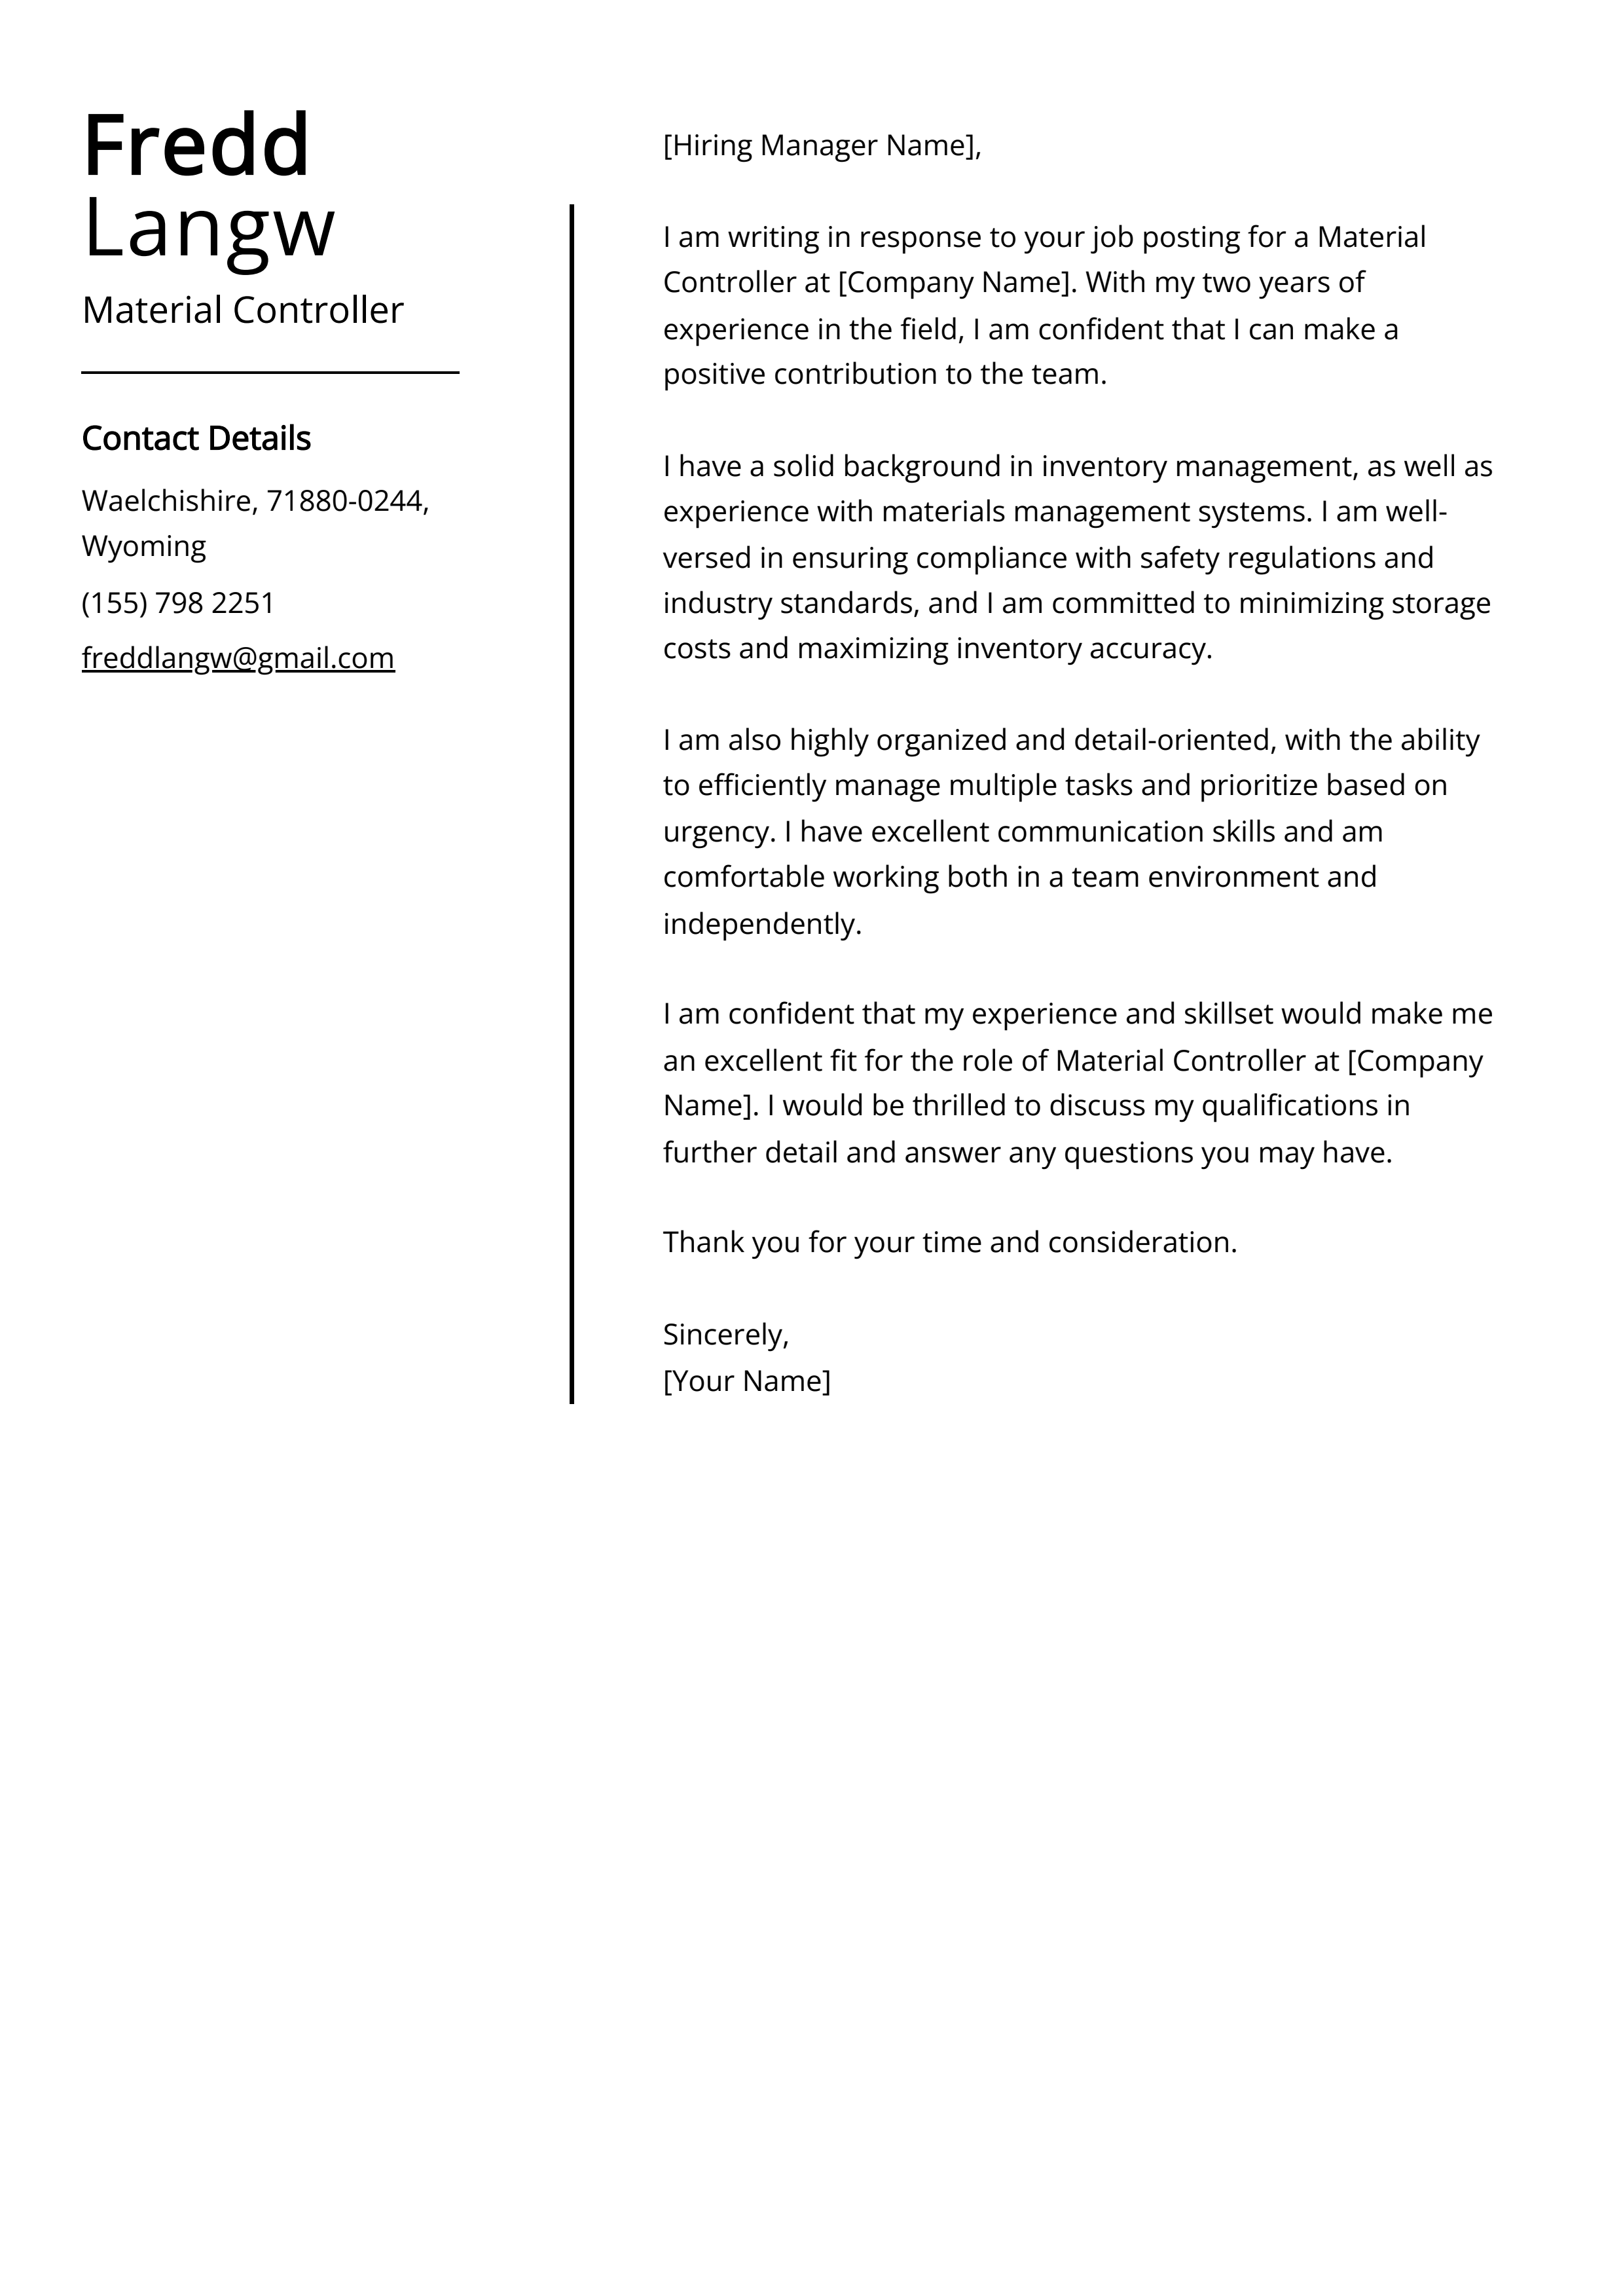 Material Controller Cover Letter Example